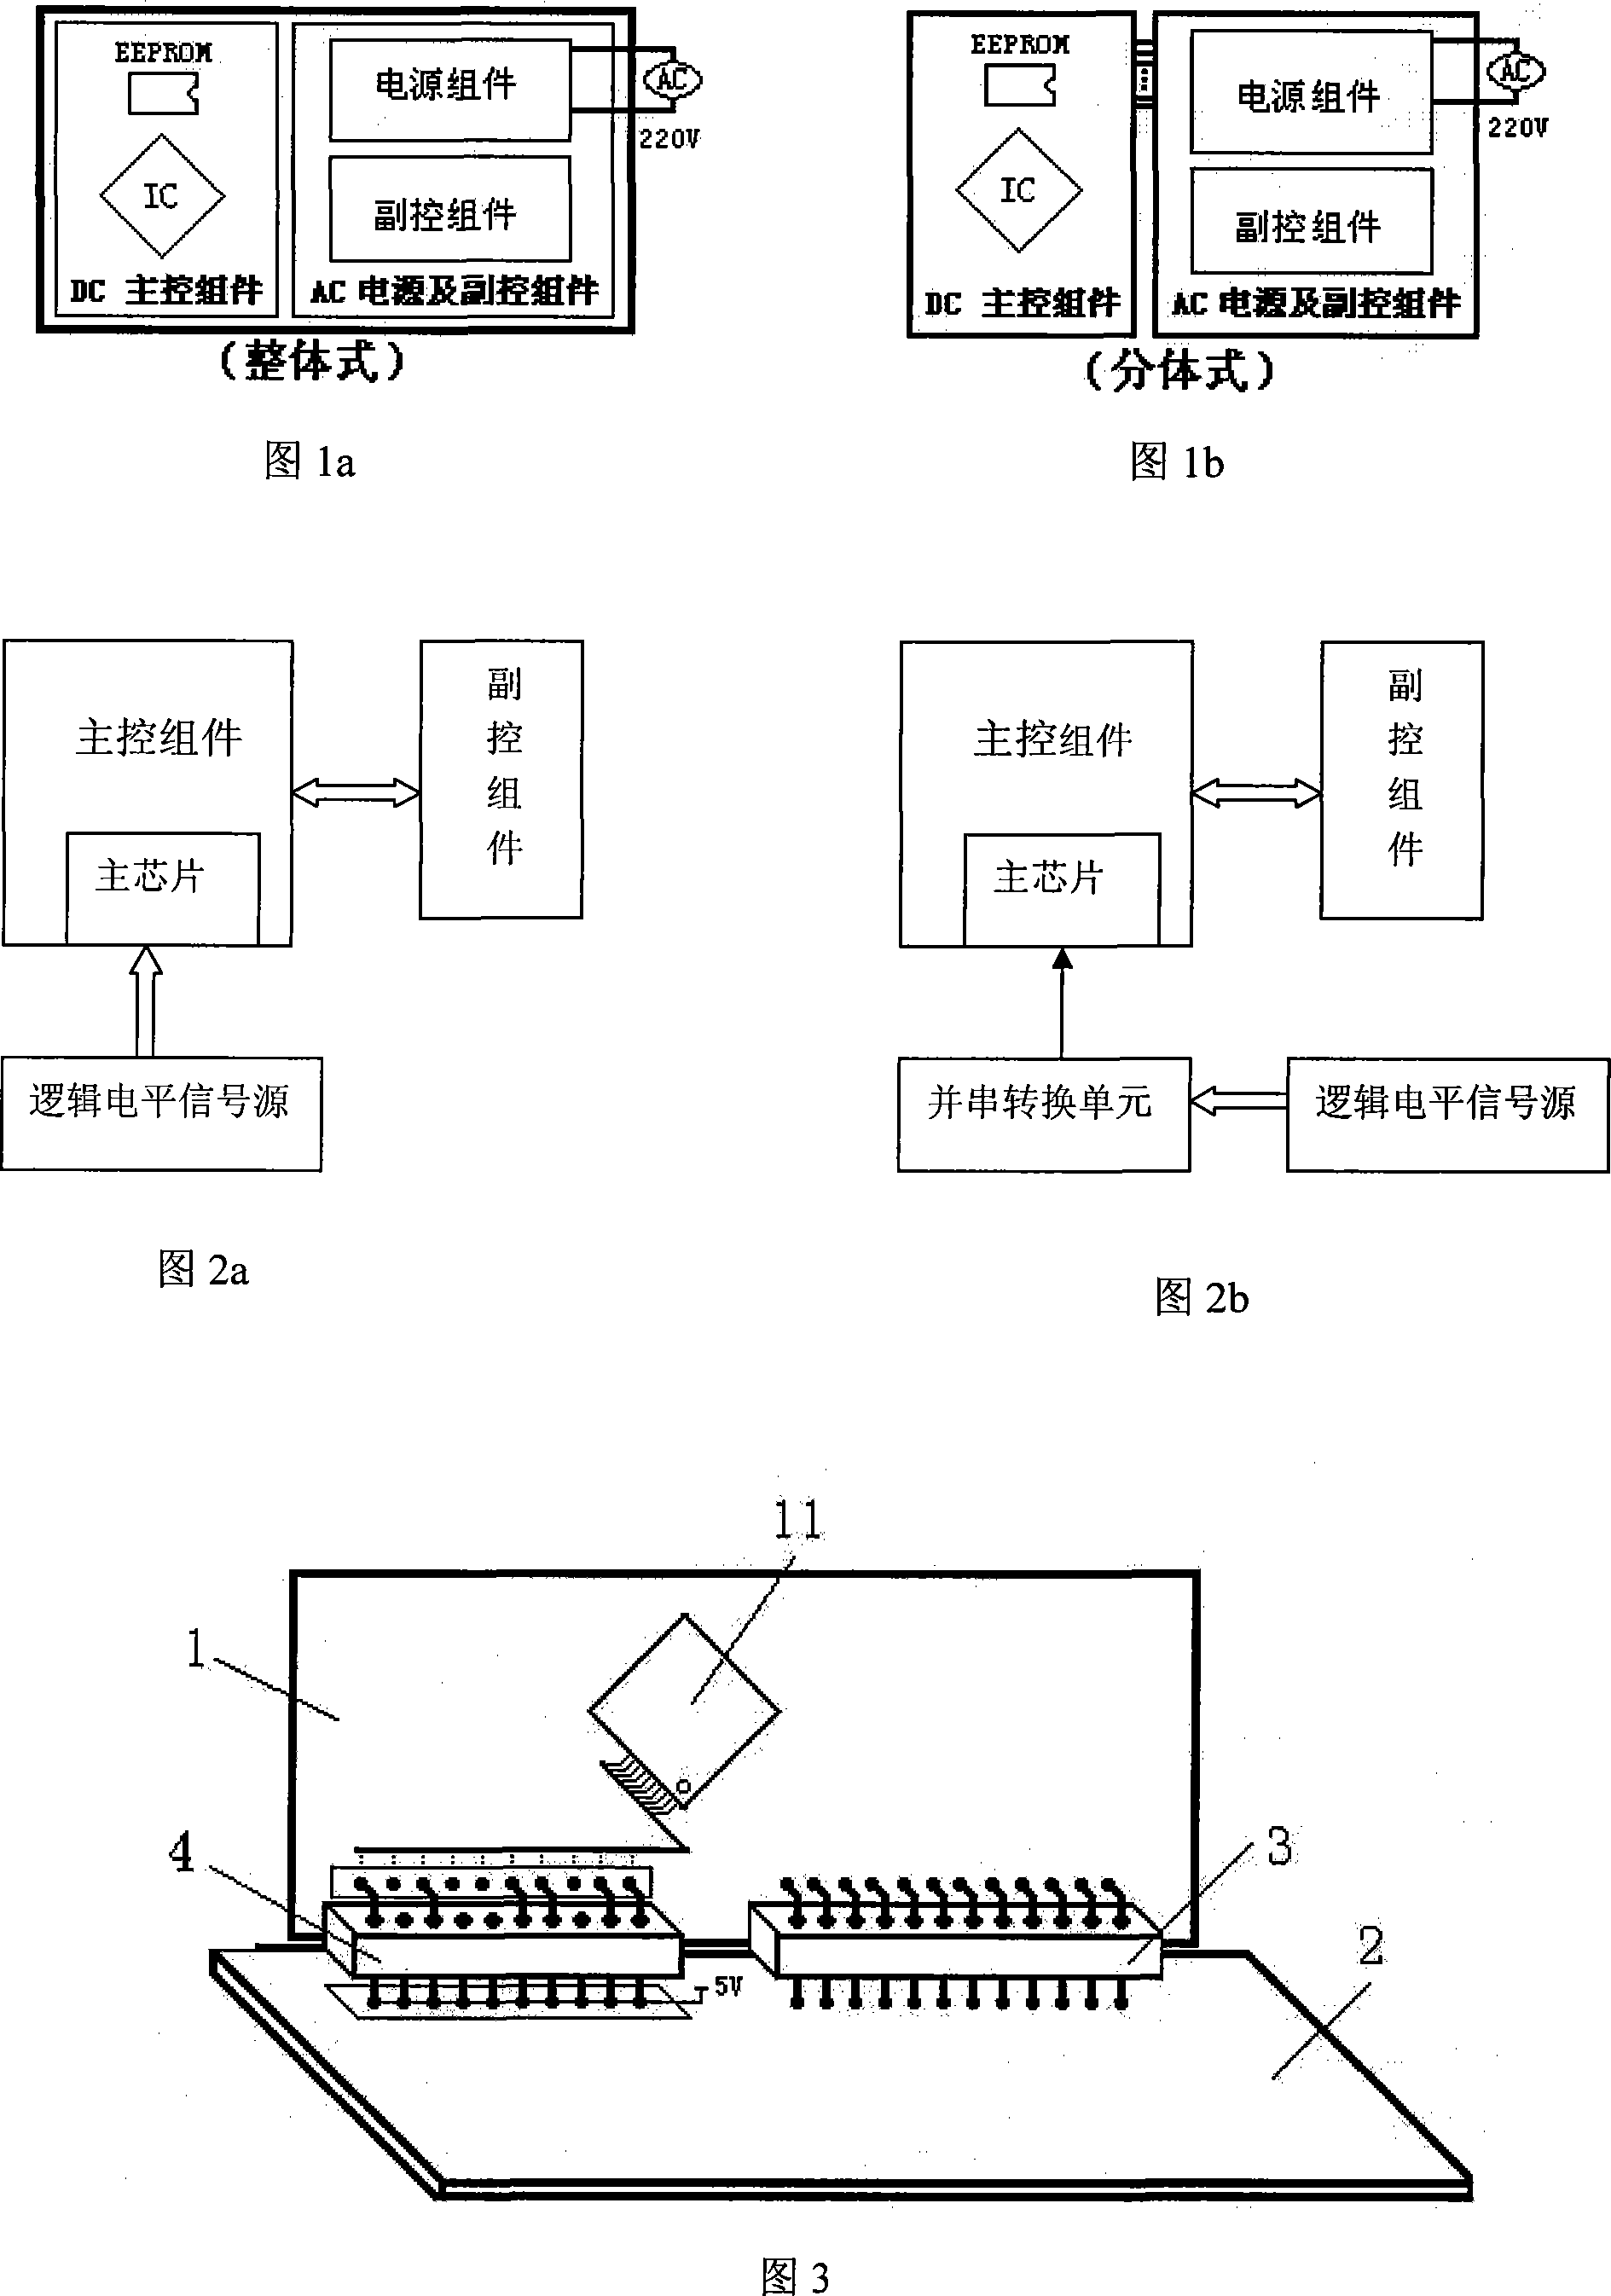 Control method of electric device and its device